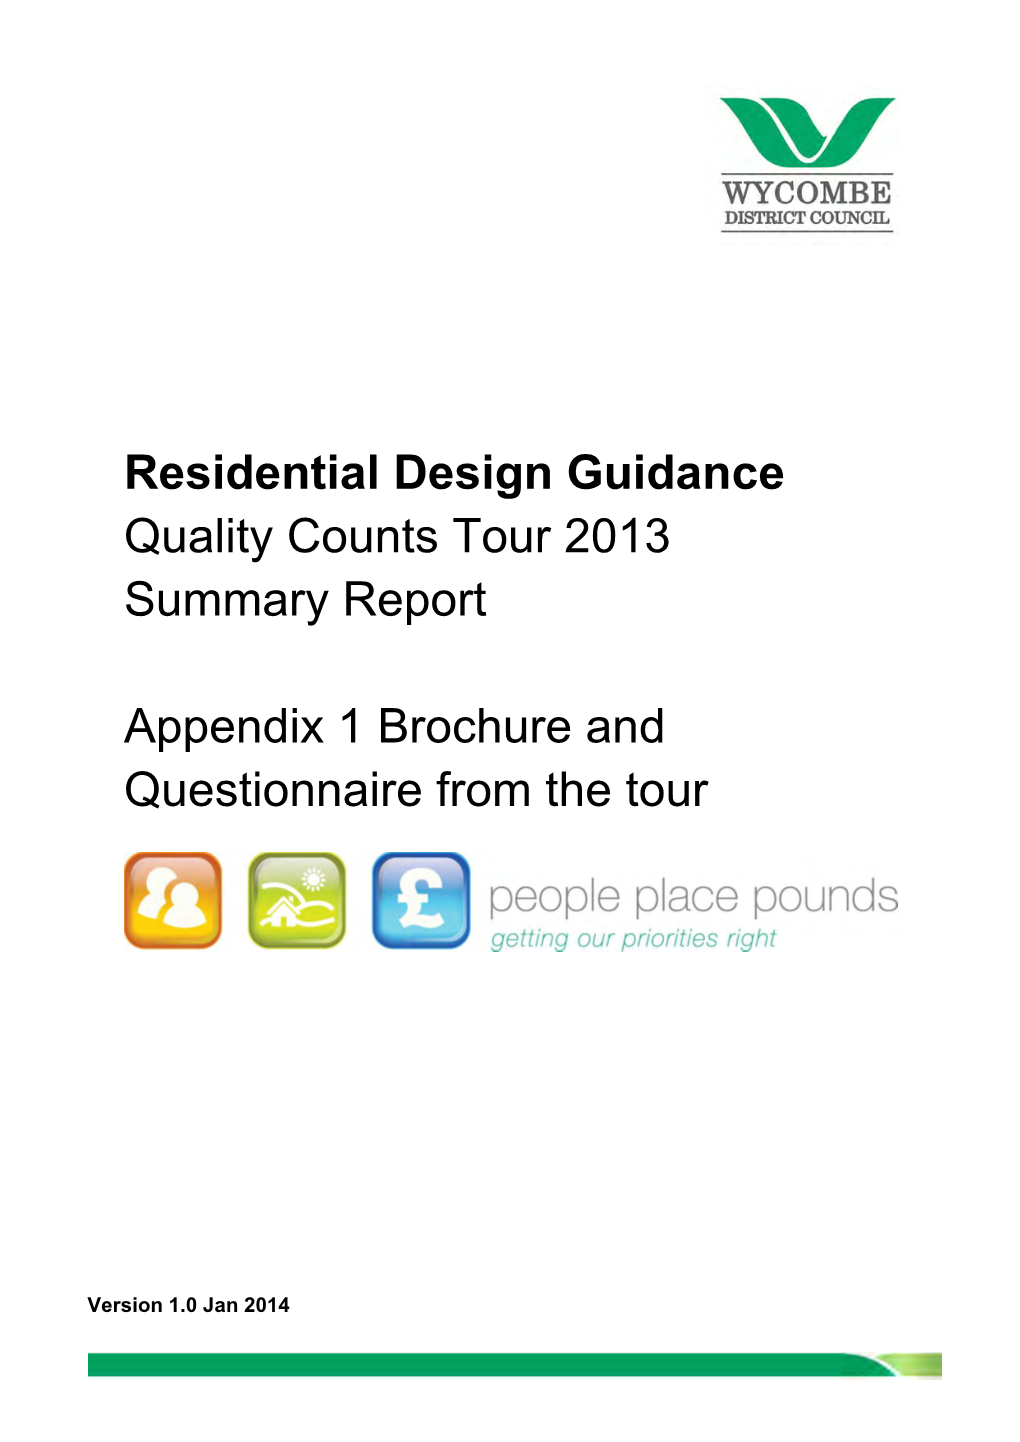 Residential Design Guidance Quality Counts Tour 2013 Summary Report